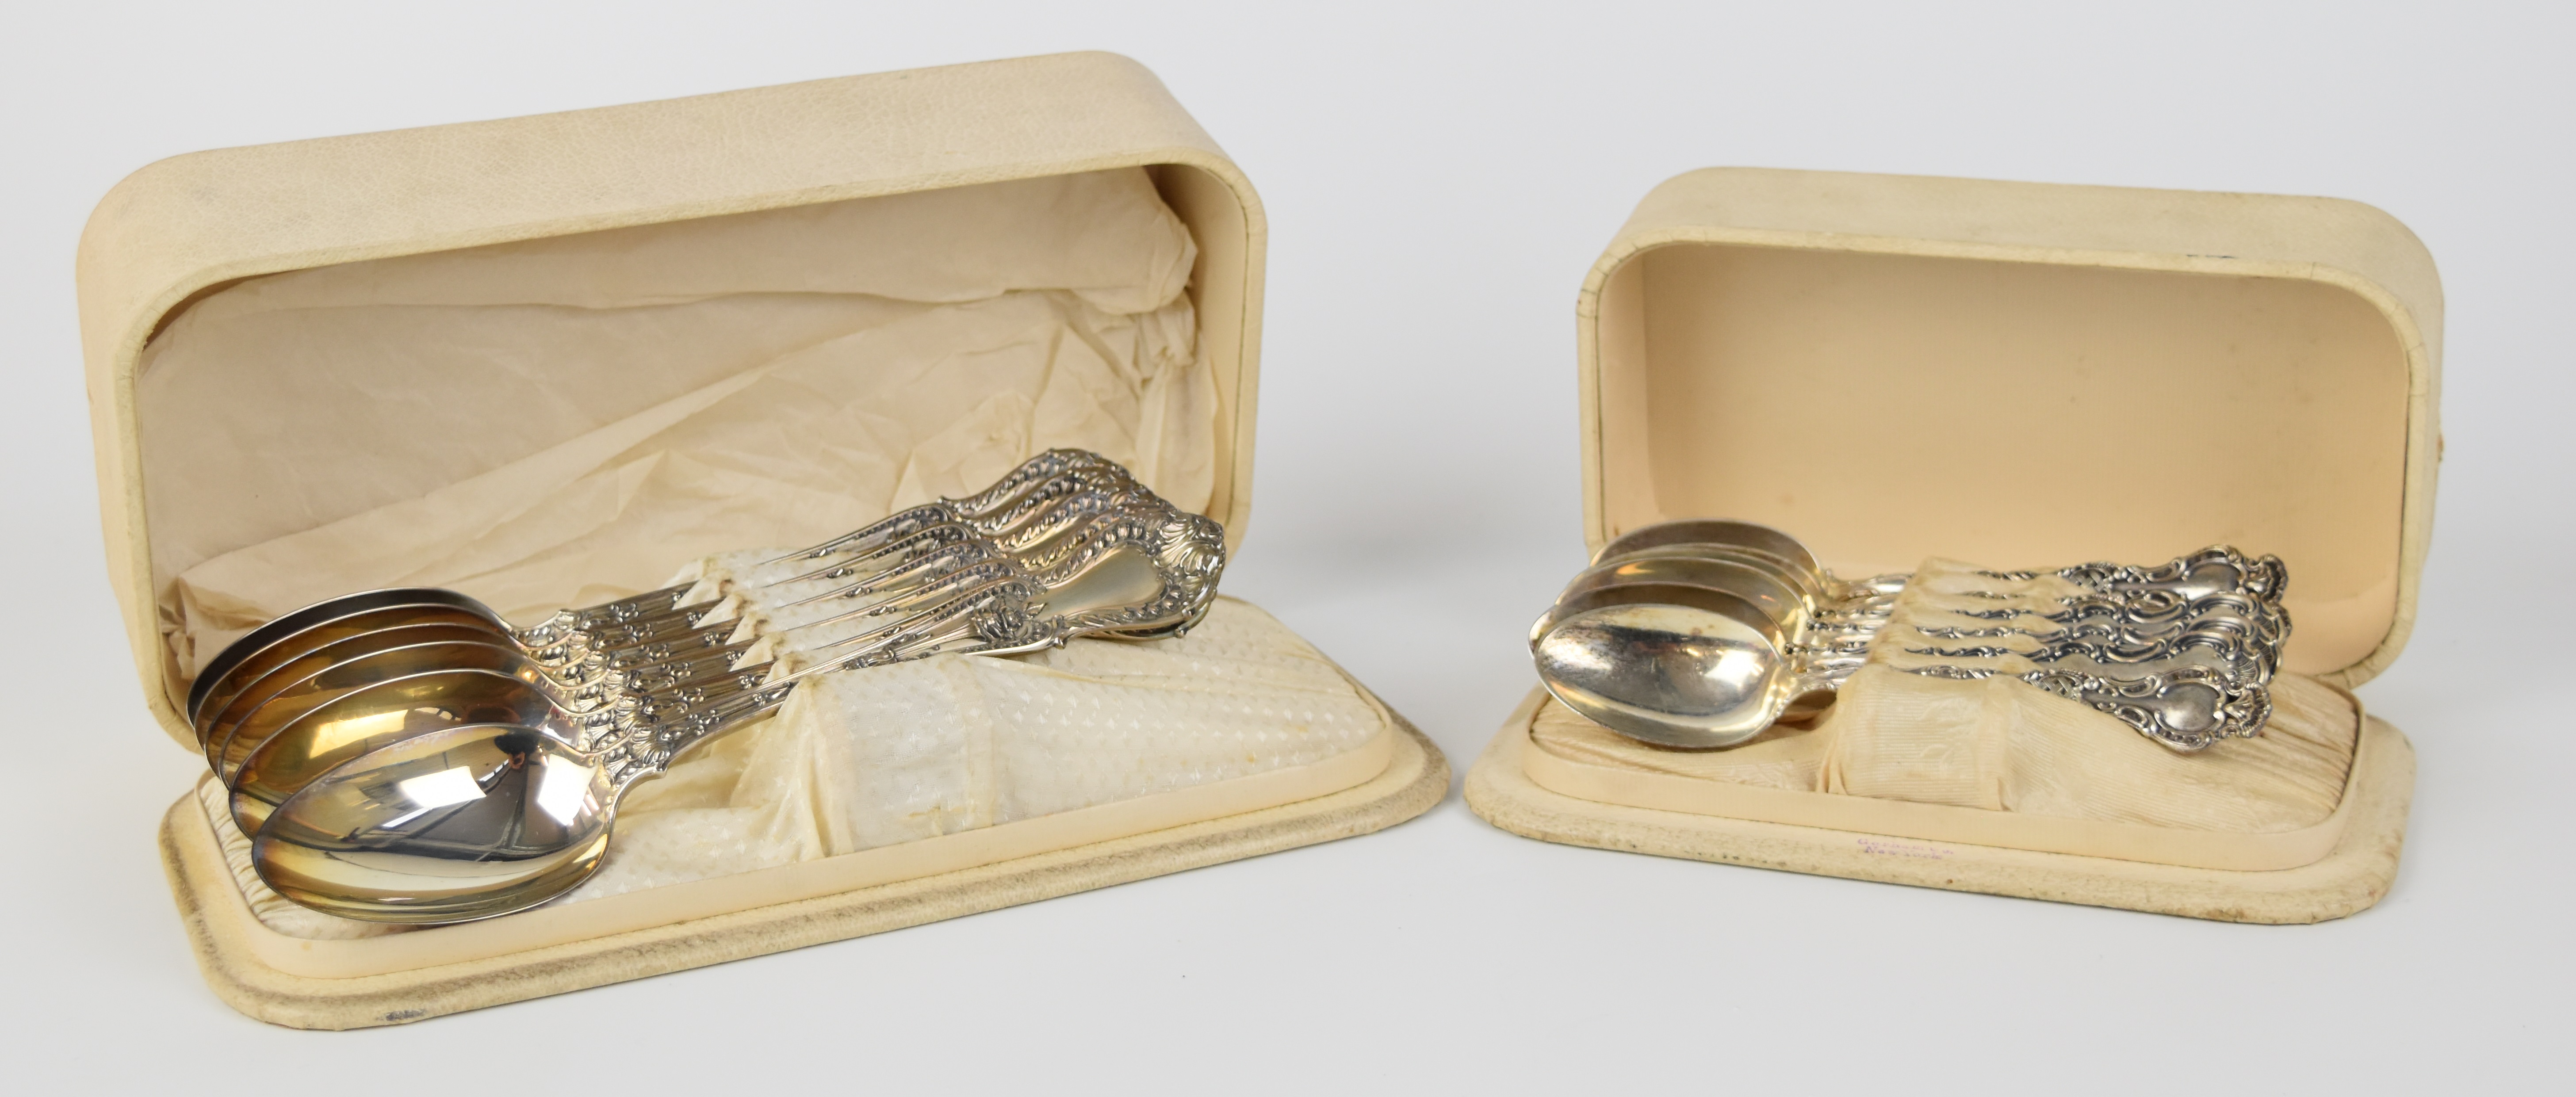 Two cases of Gorham and similar American silver spoons, comprising six table spoons and six